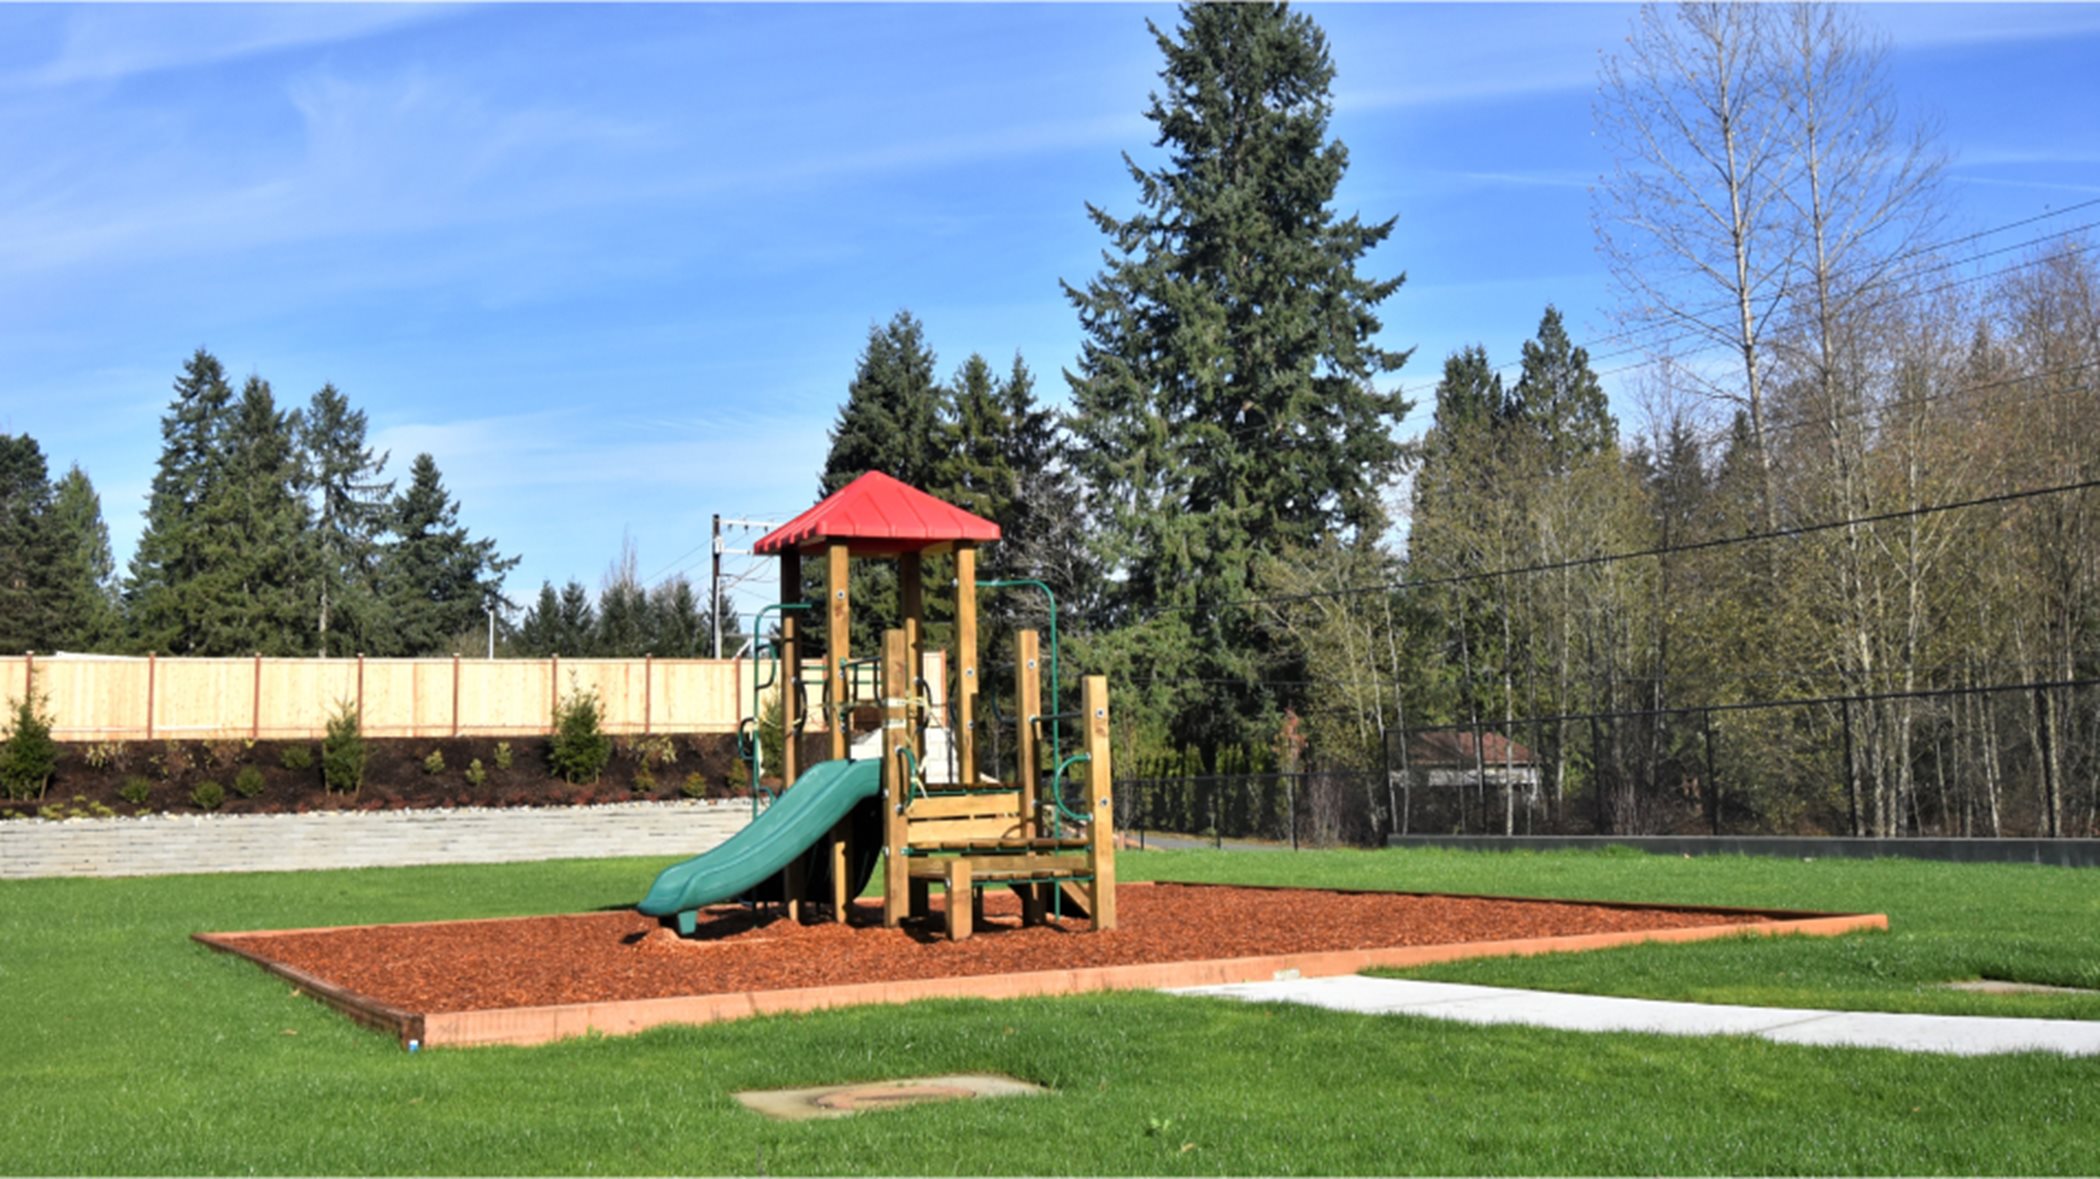 Playground featured in the community park